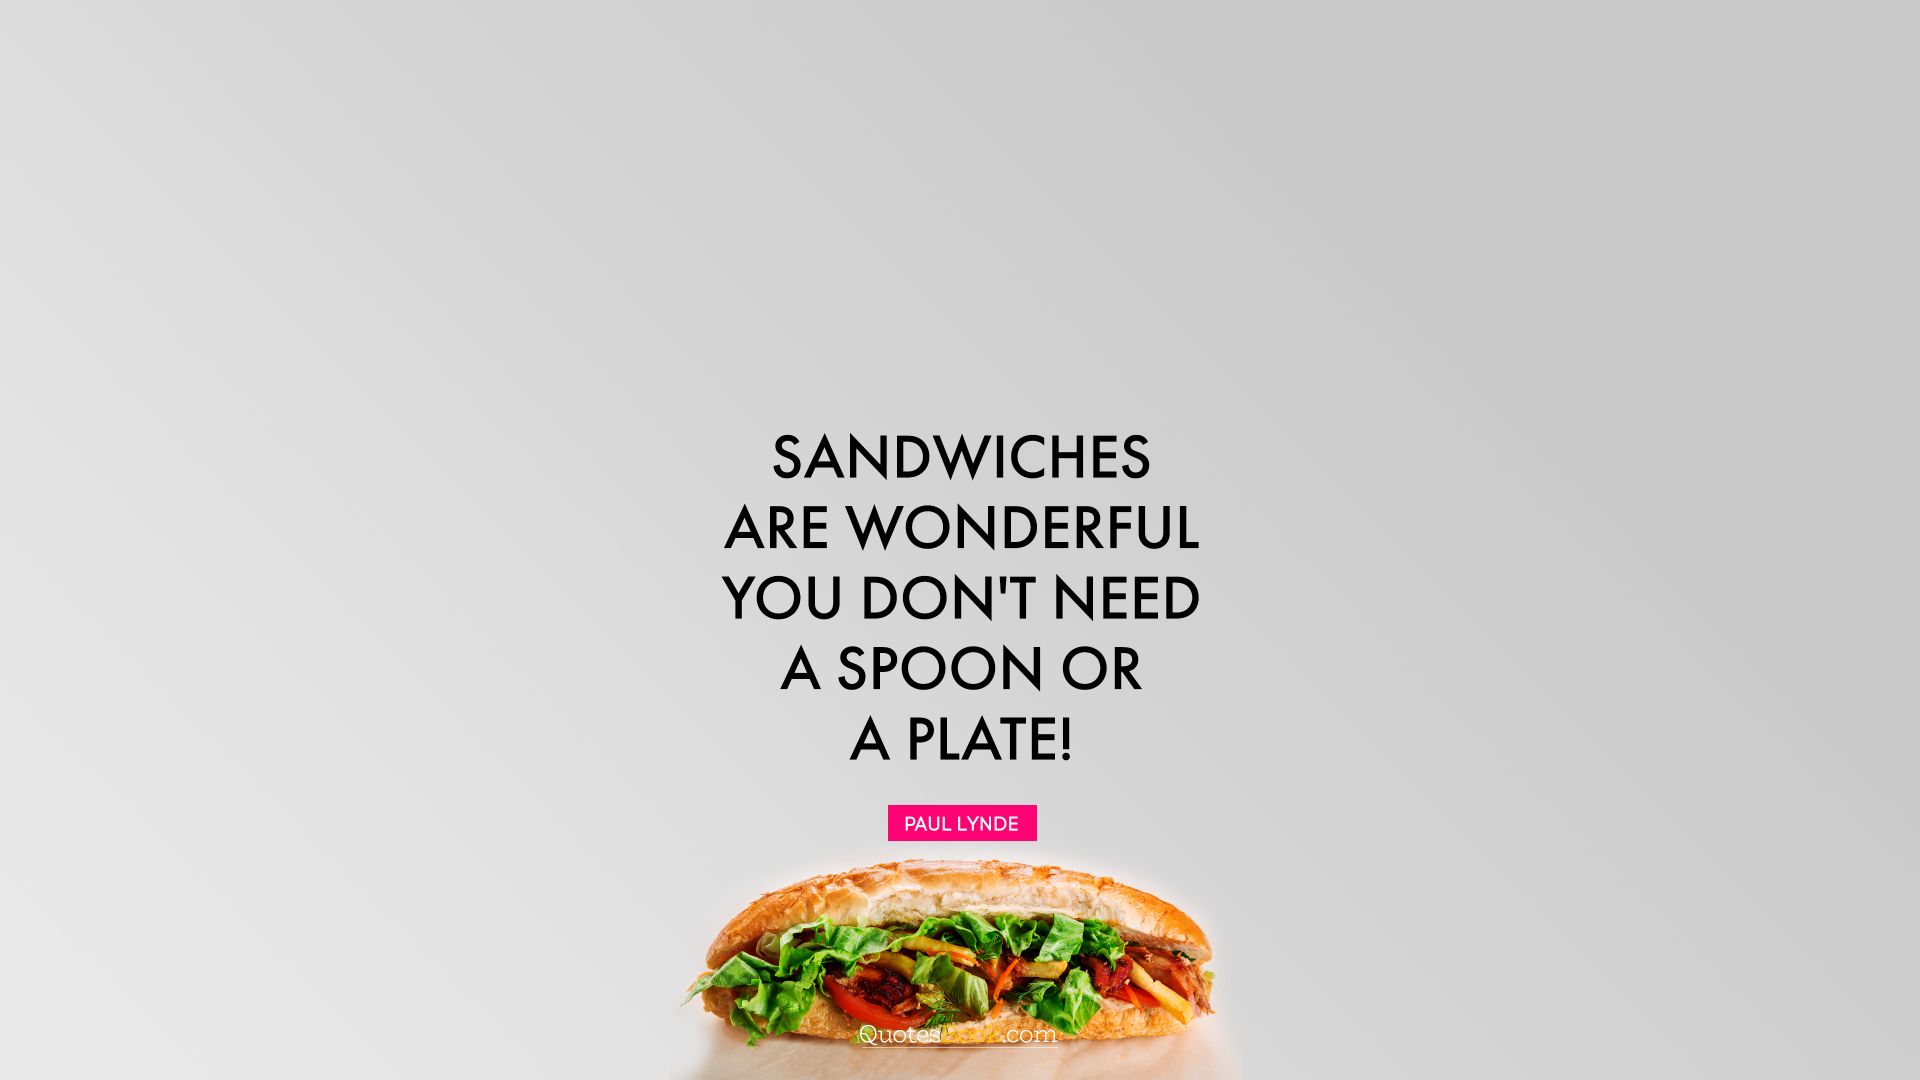 Sandwiches are wonderful. You don't need a spoon or a plate!. - Quote by Paul Lynde